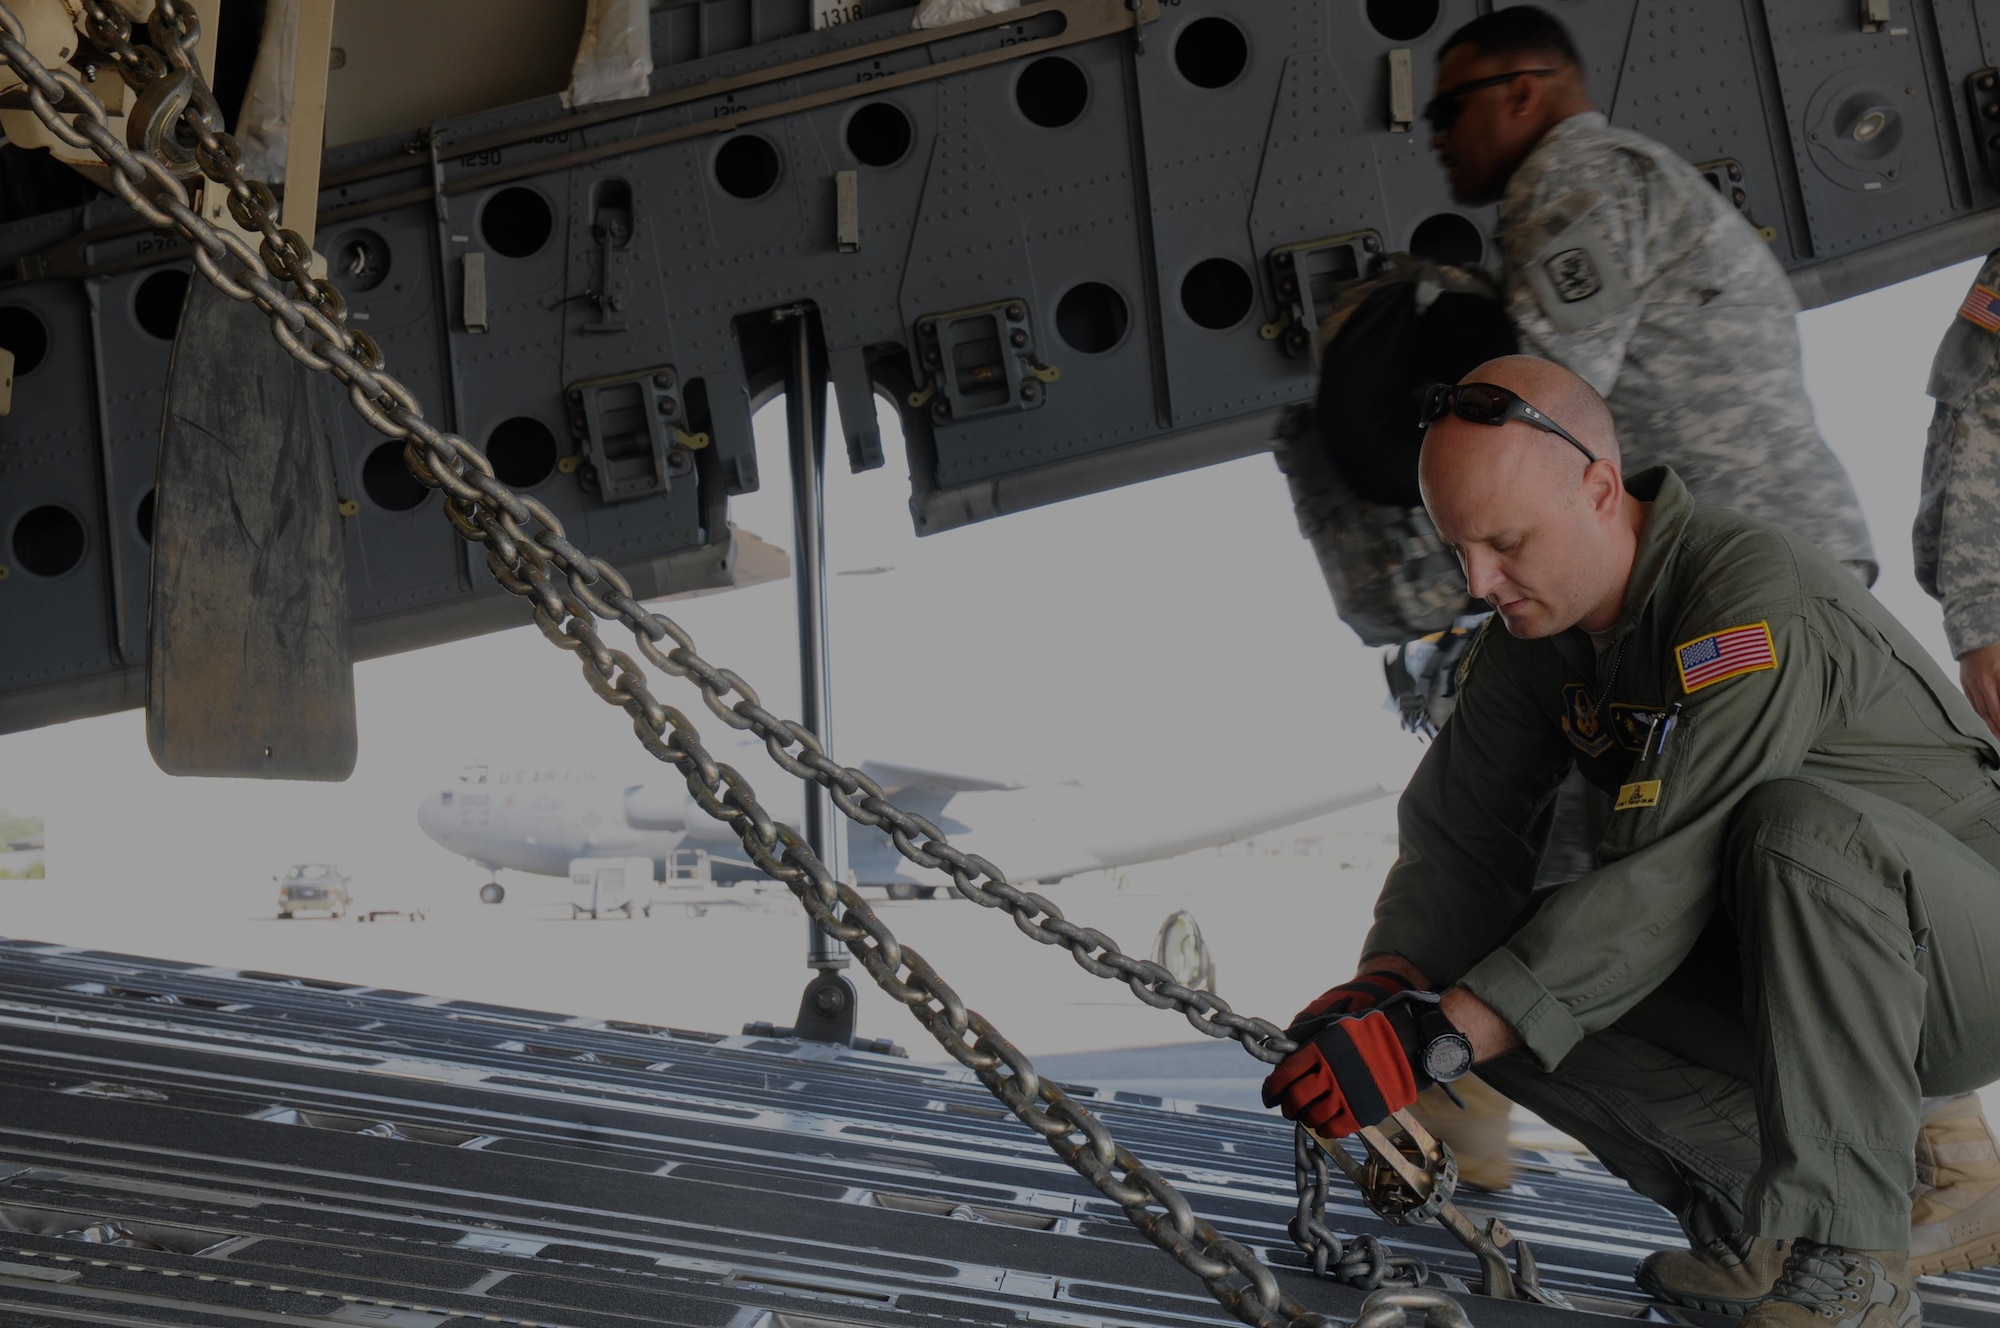 Staff Sgt. Doug Wattier a Loadmaster with the 317th Airlift Squadron based in Charleston, S.C., chains down a Light Medium Tactical Vehicle LMTV into the cargo bay of a Boeing C-17 Globe master on Aug. 15, 2015, in support of Operation Red Dragon. Red Dragon is a Civil Defense readiness exercise incorporating Army Reserve and National Guard Soldiers with civilian first responder agencies such as fire departments, police departments and hospitals to improve capabilities in large-scale chemical defense operations. (U.S. Army photo by Sgt. Eben Boothby)